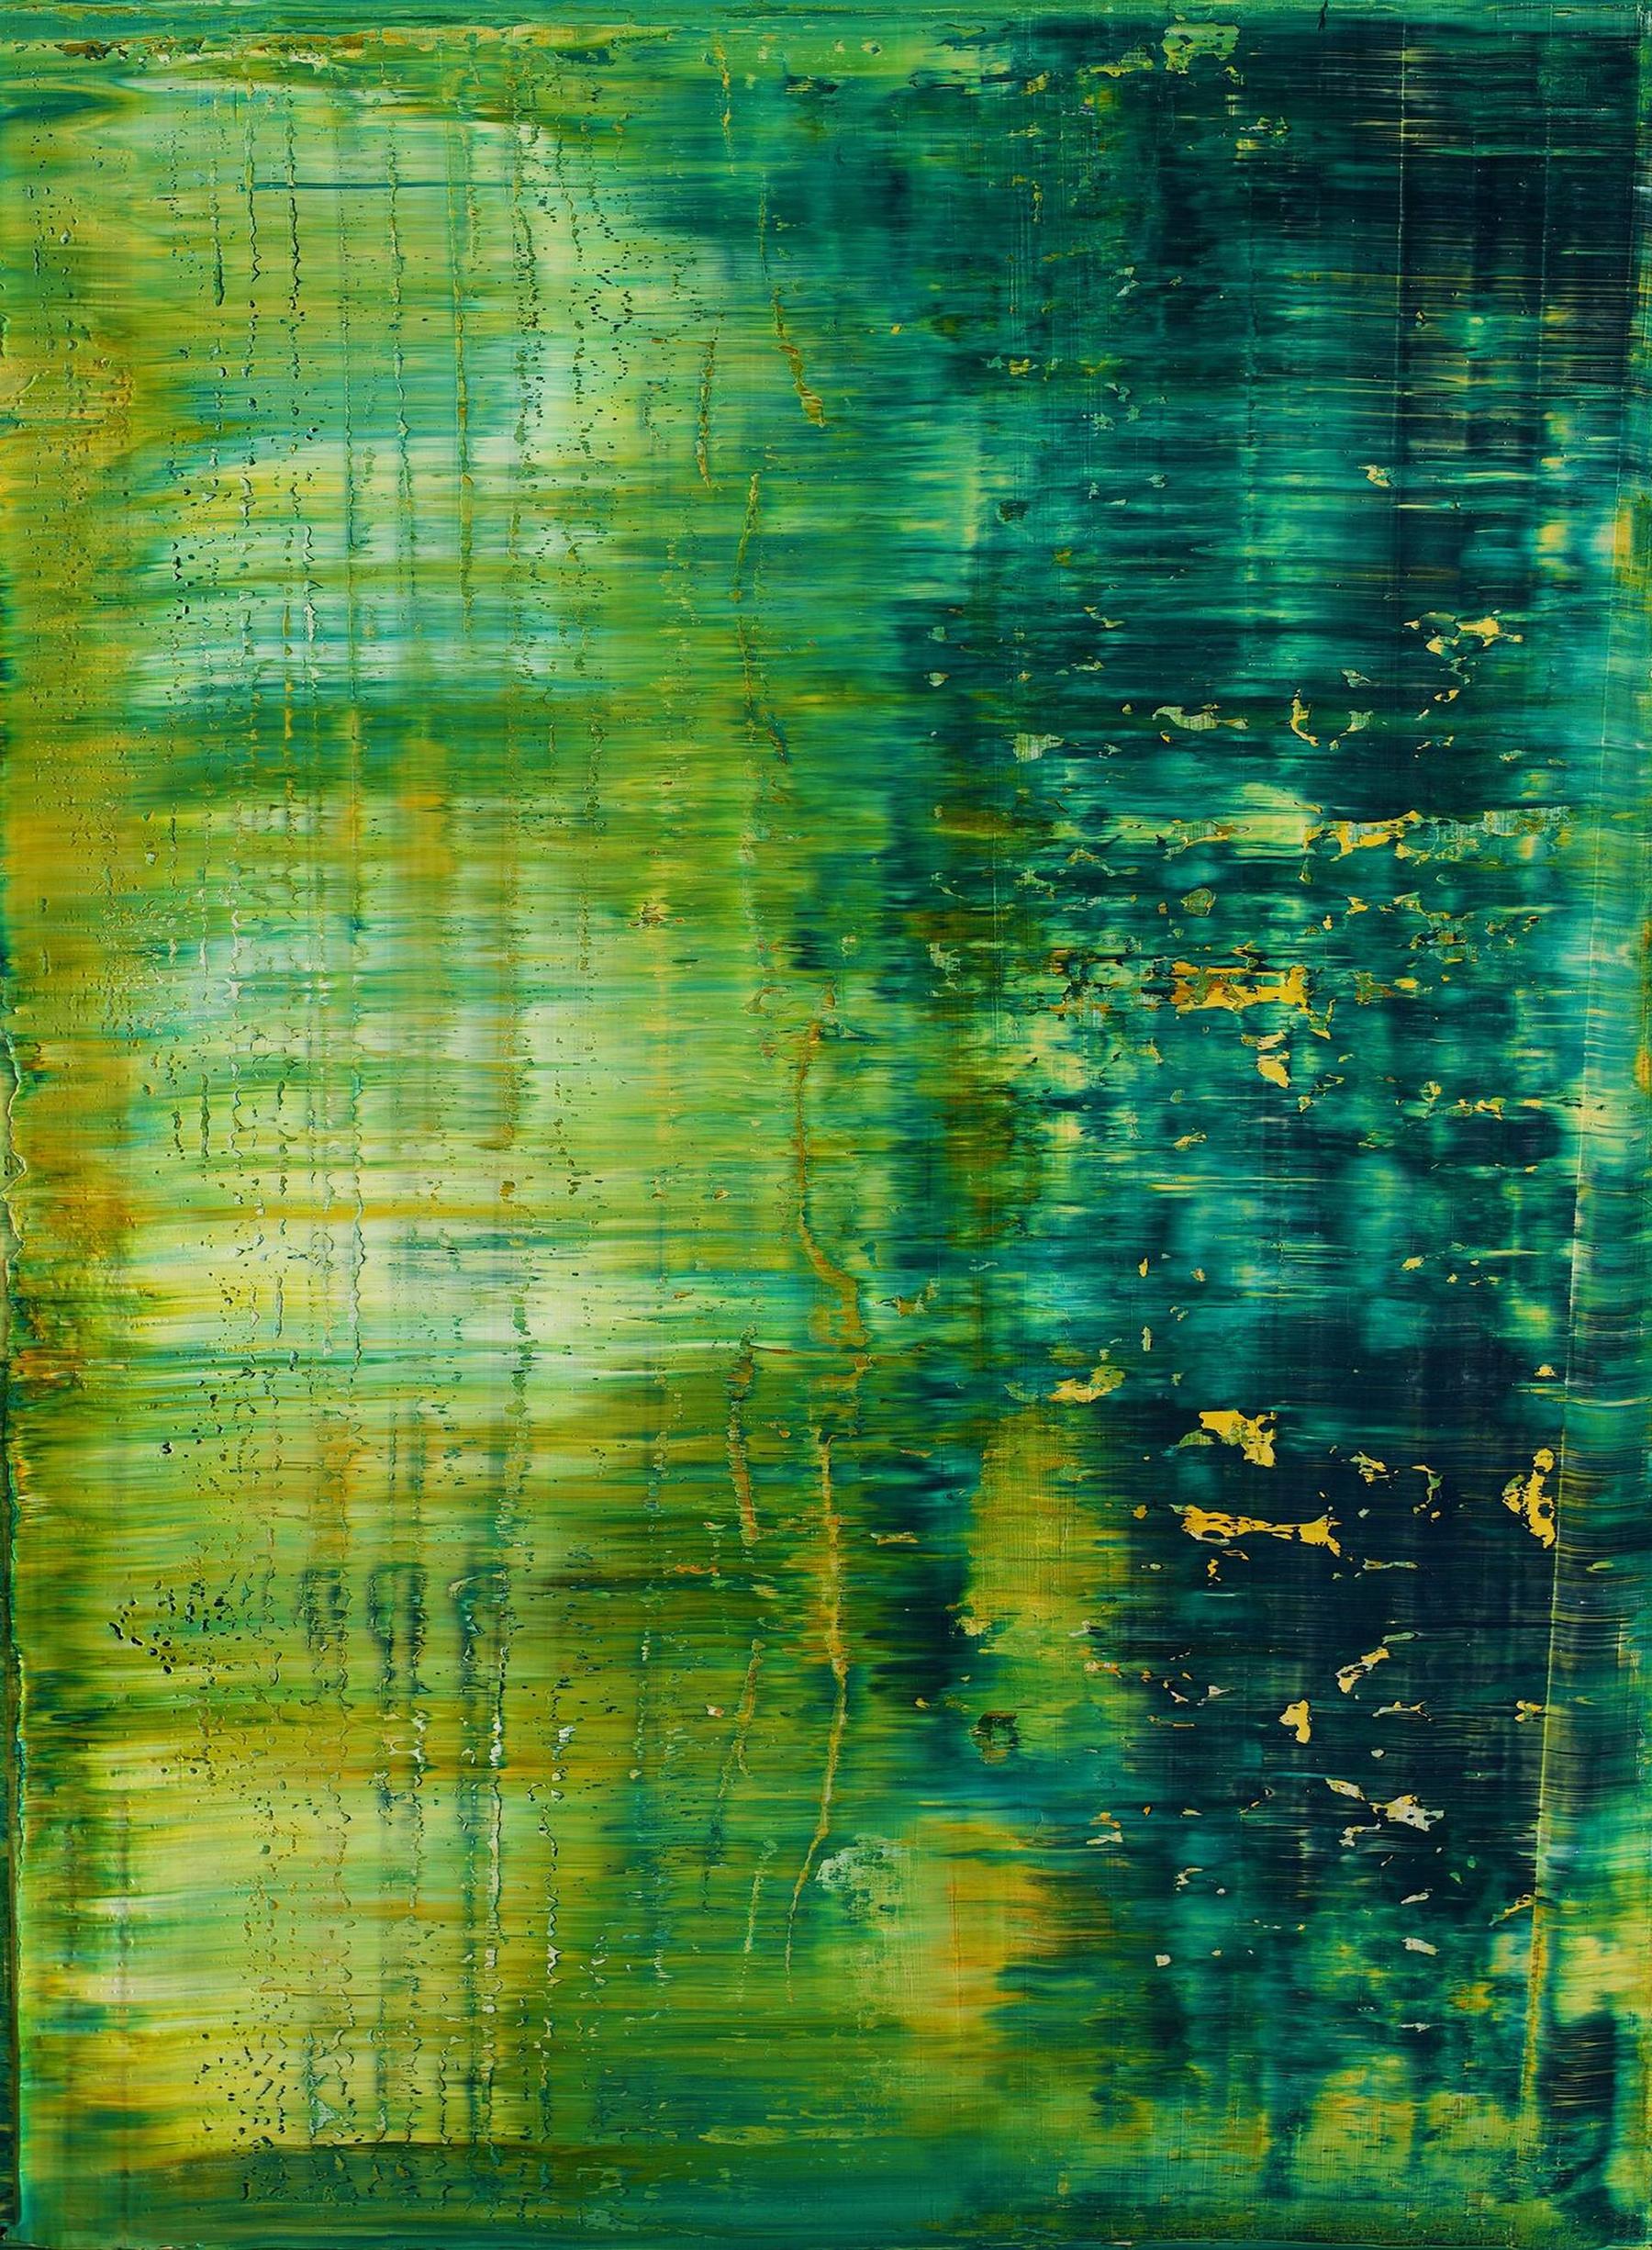 Abstract Painting Harry James Moody - Affiche abstraite vert n°490